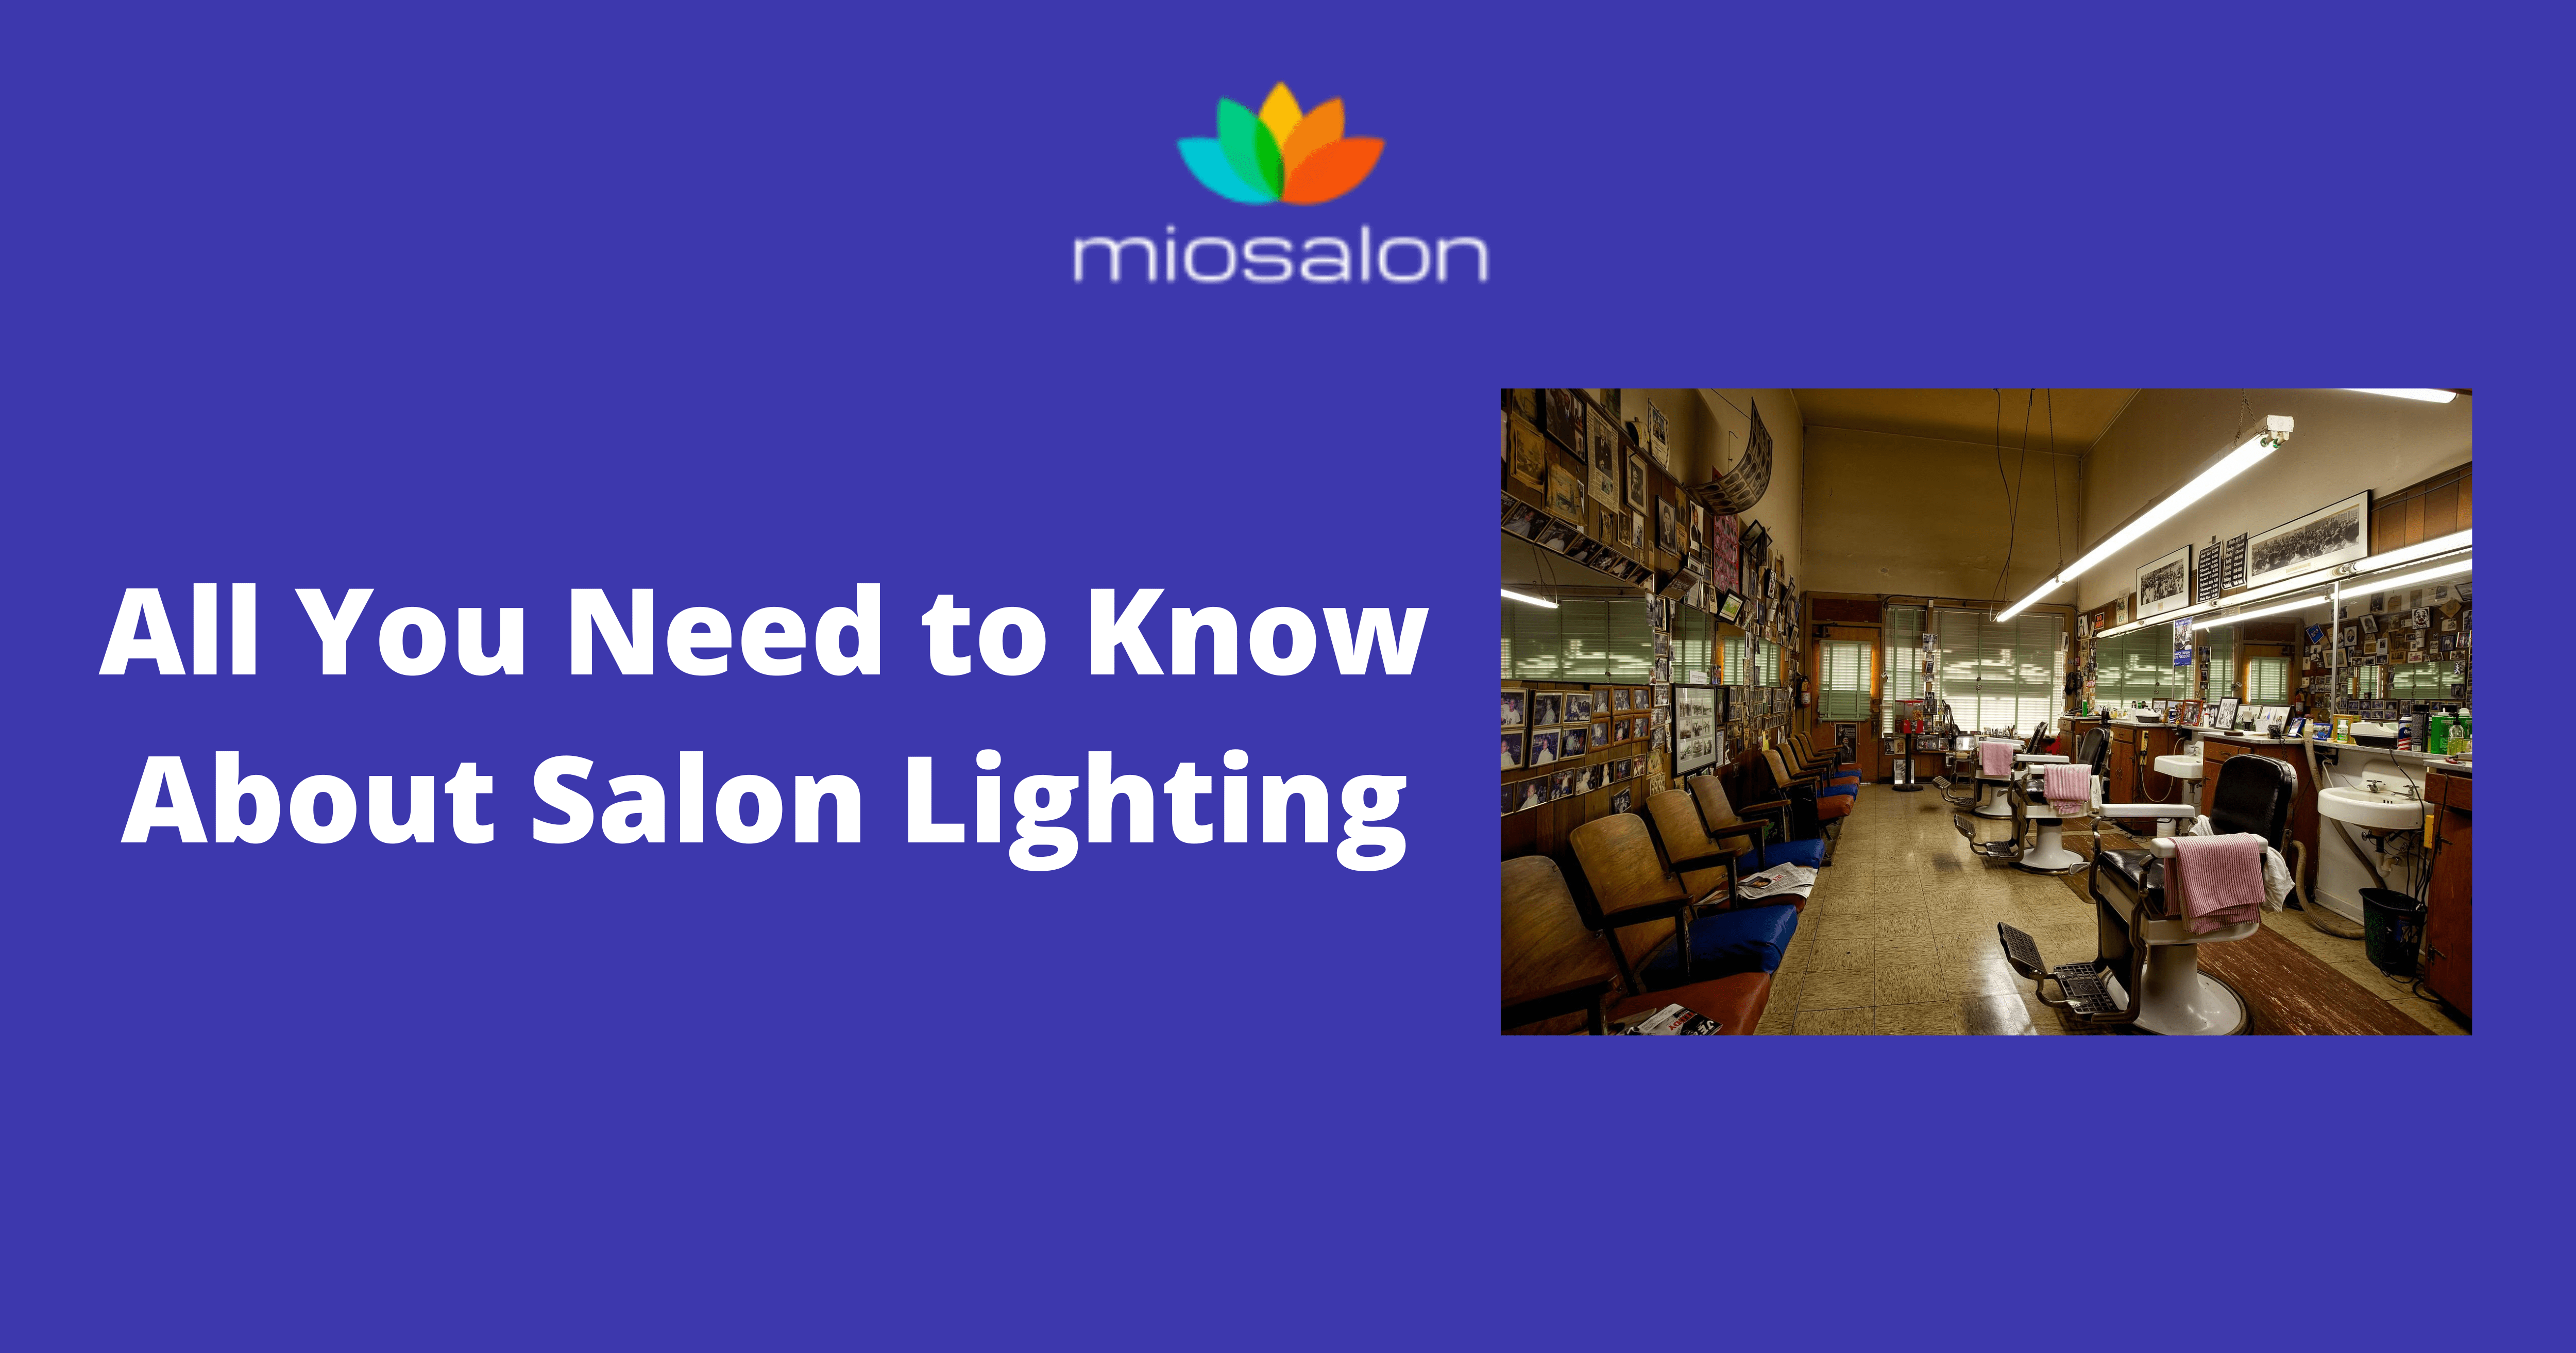 All You Need to Know About Salon Lighting